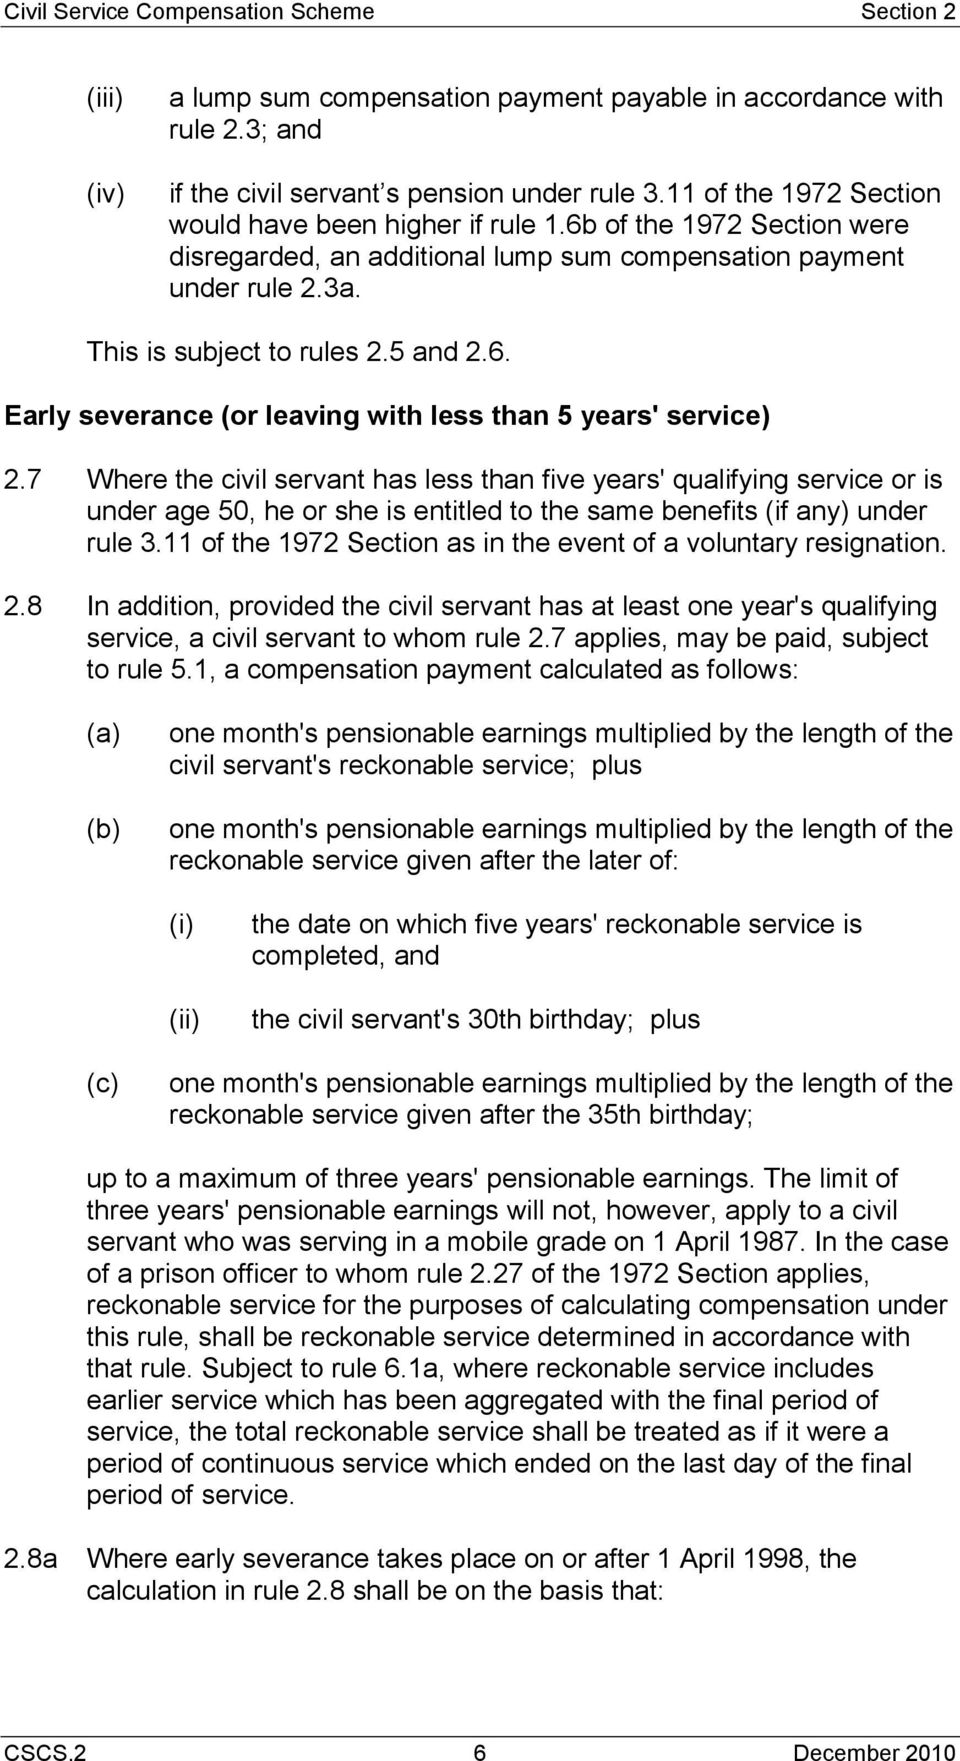 7 Where the civil servant has less than five years' qualifying service or is under age 50, he or she is entitled to the same benefits (if any) under rule 3.